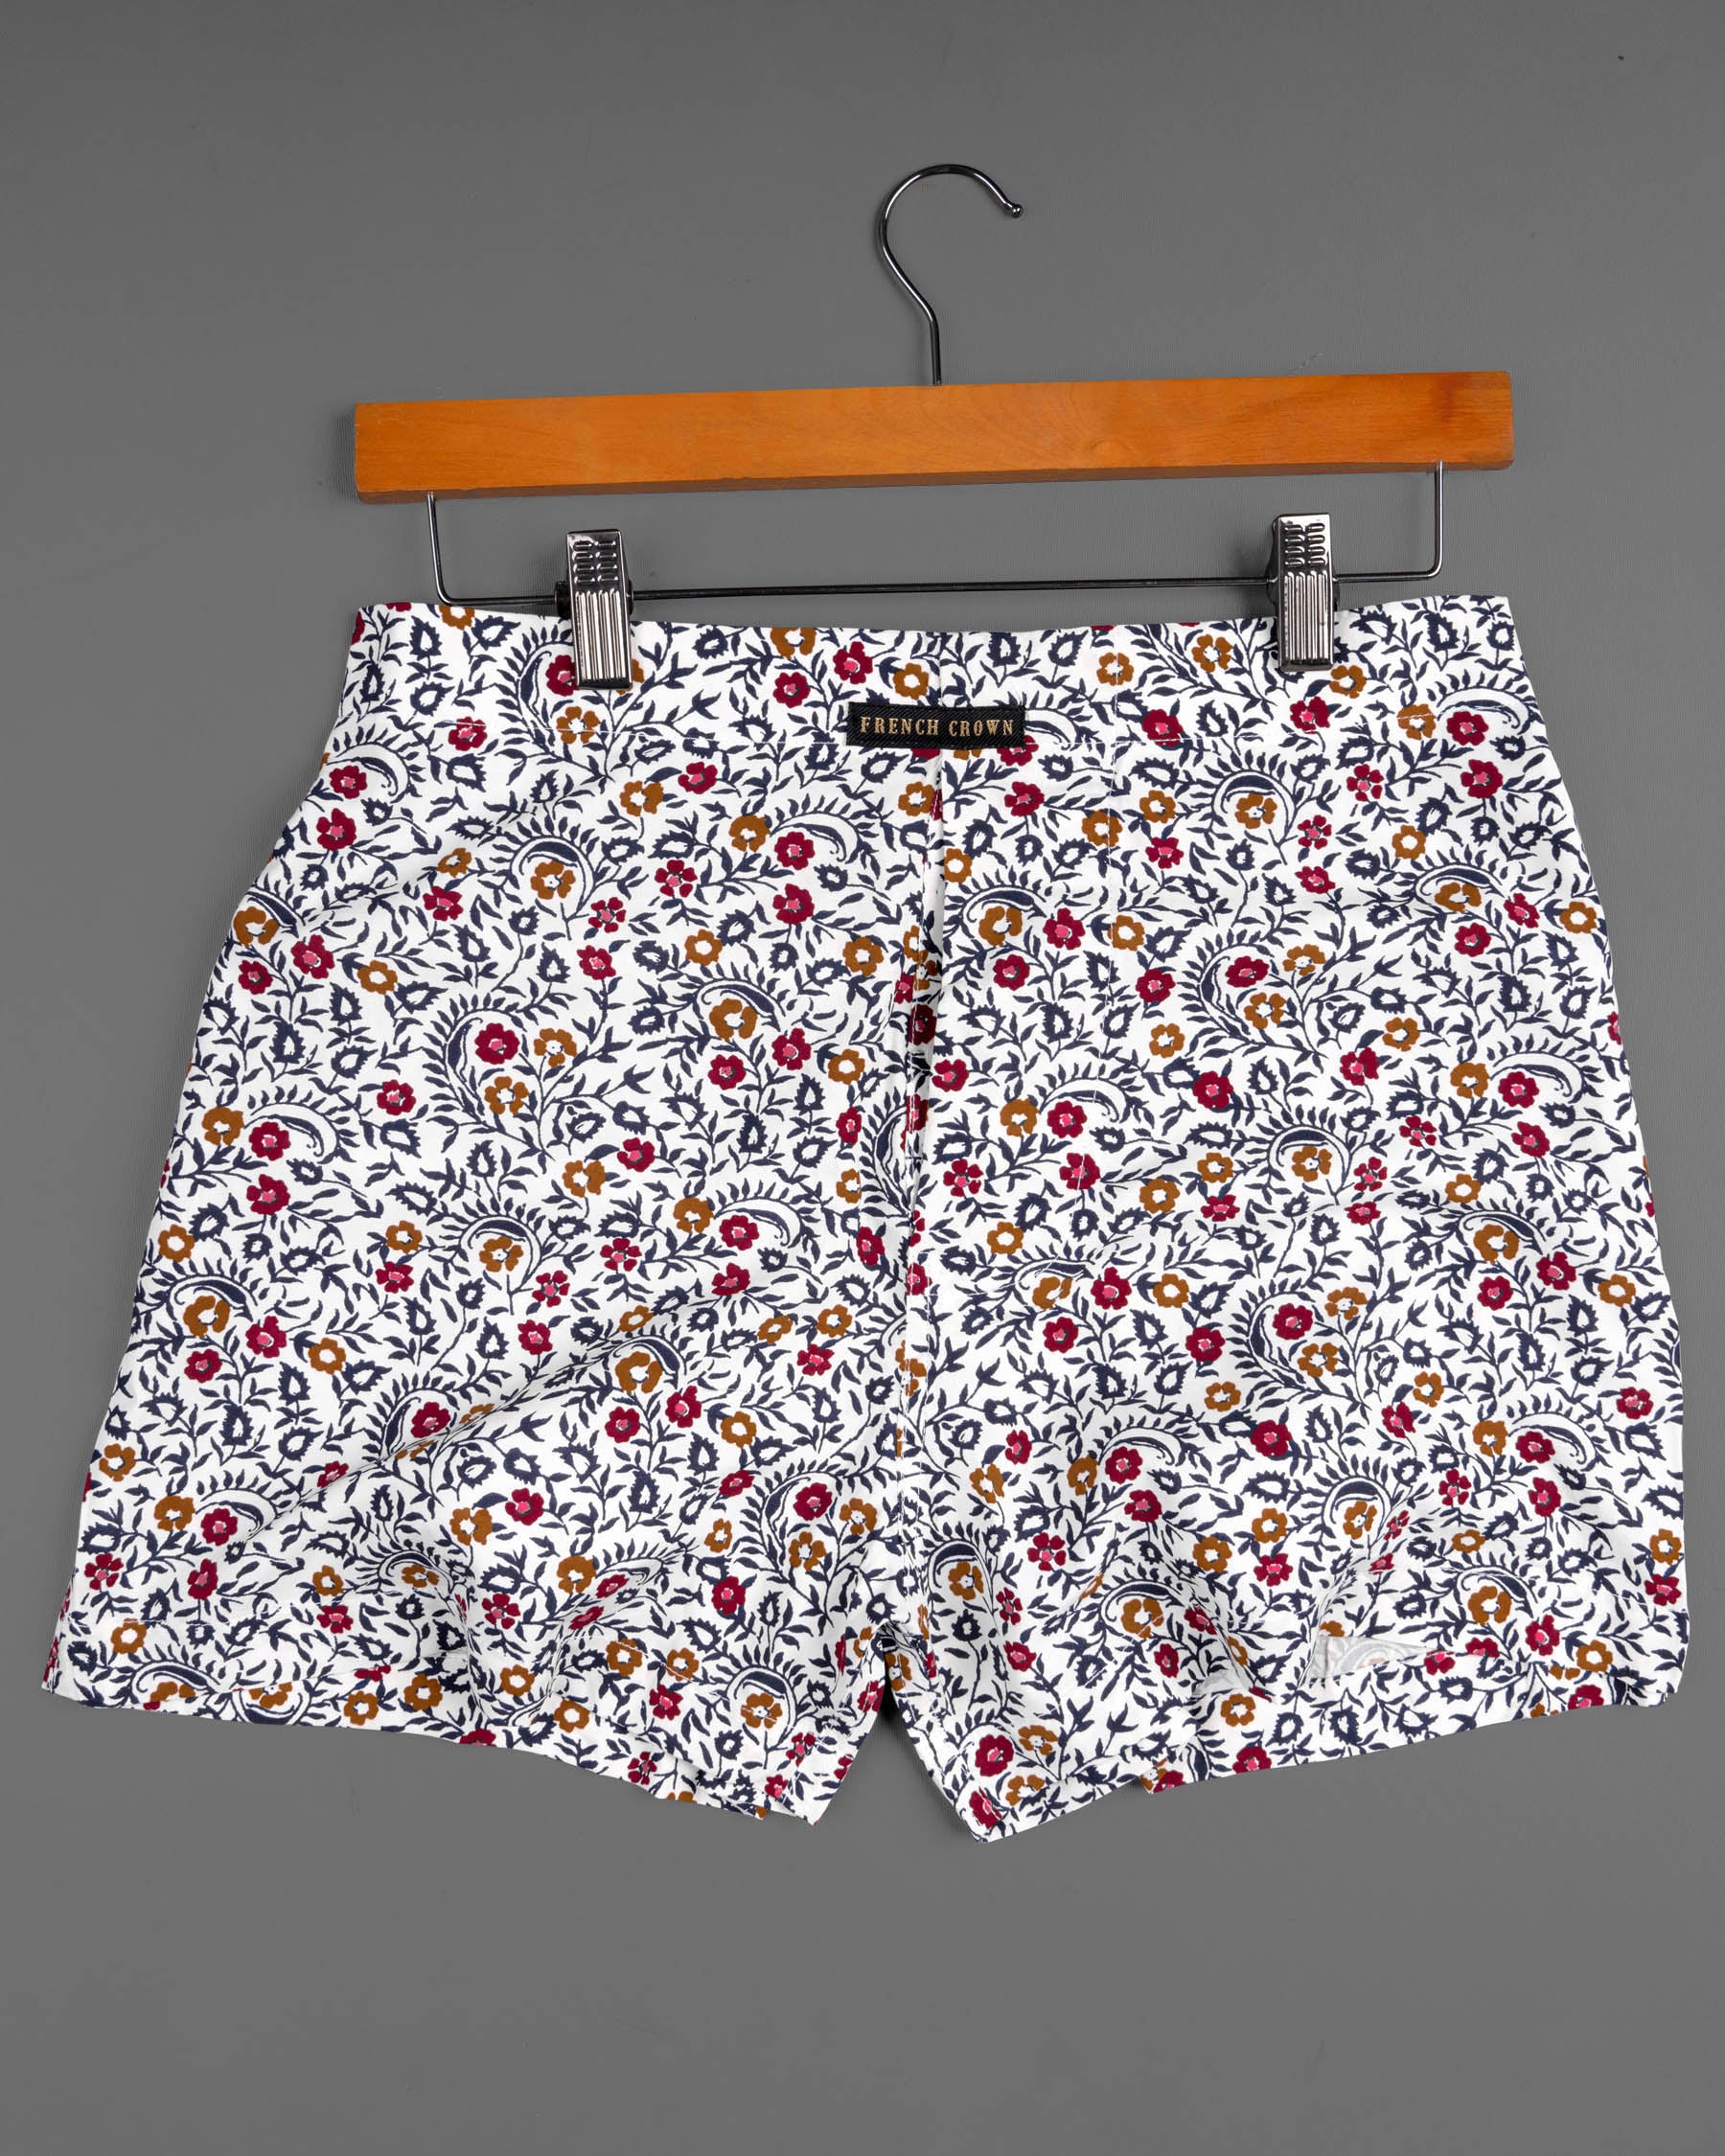 Bright White and Tamarillo Red with Camouflage Green and Saffron Floral Printed Premium Tencel Boxers BX422-28, BX422-30, BX422-32, BX422-34, BX422-36, BX422-38, BX422-40, BX422-42, BX422-44